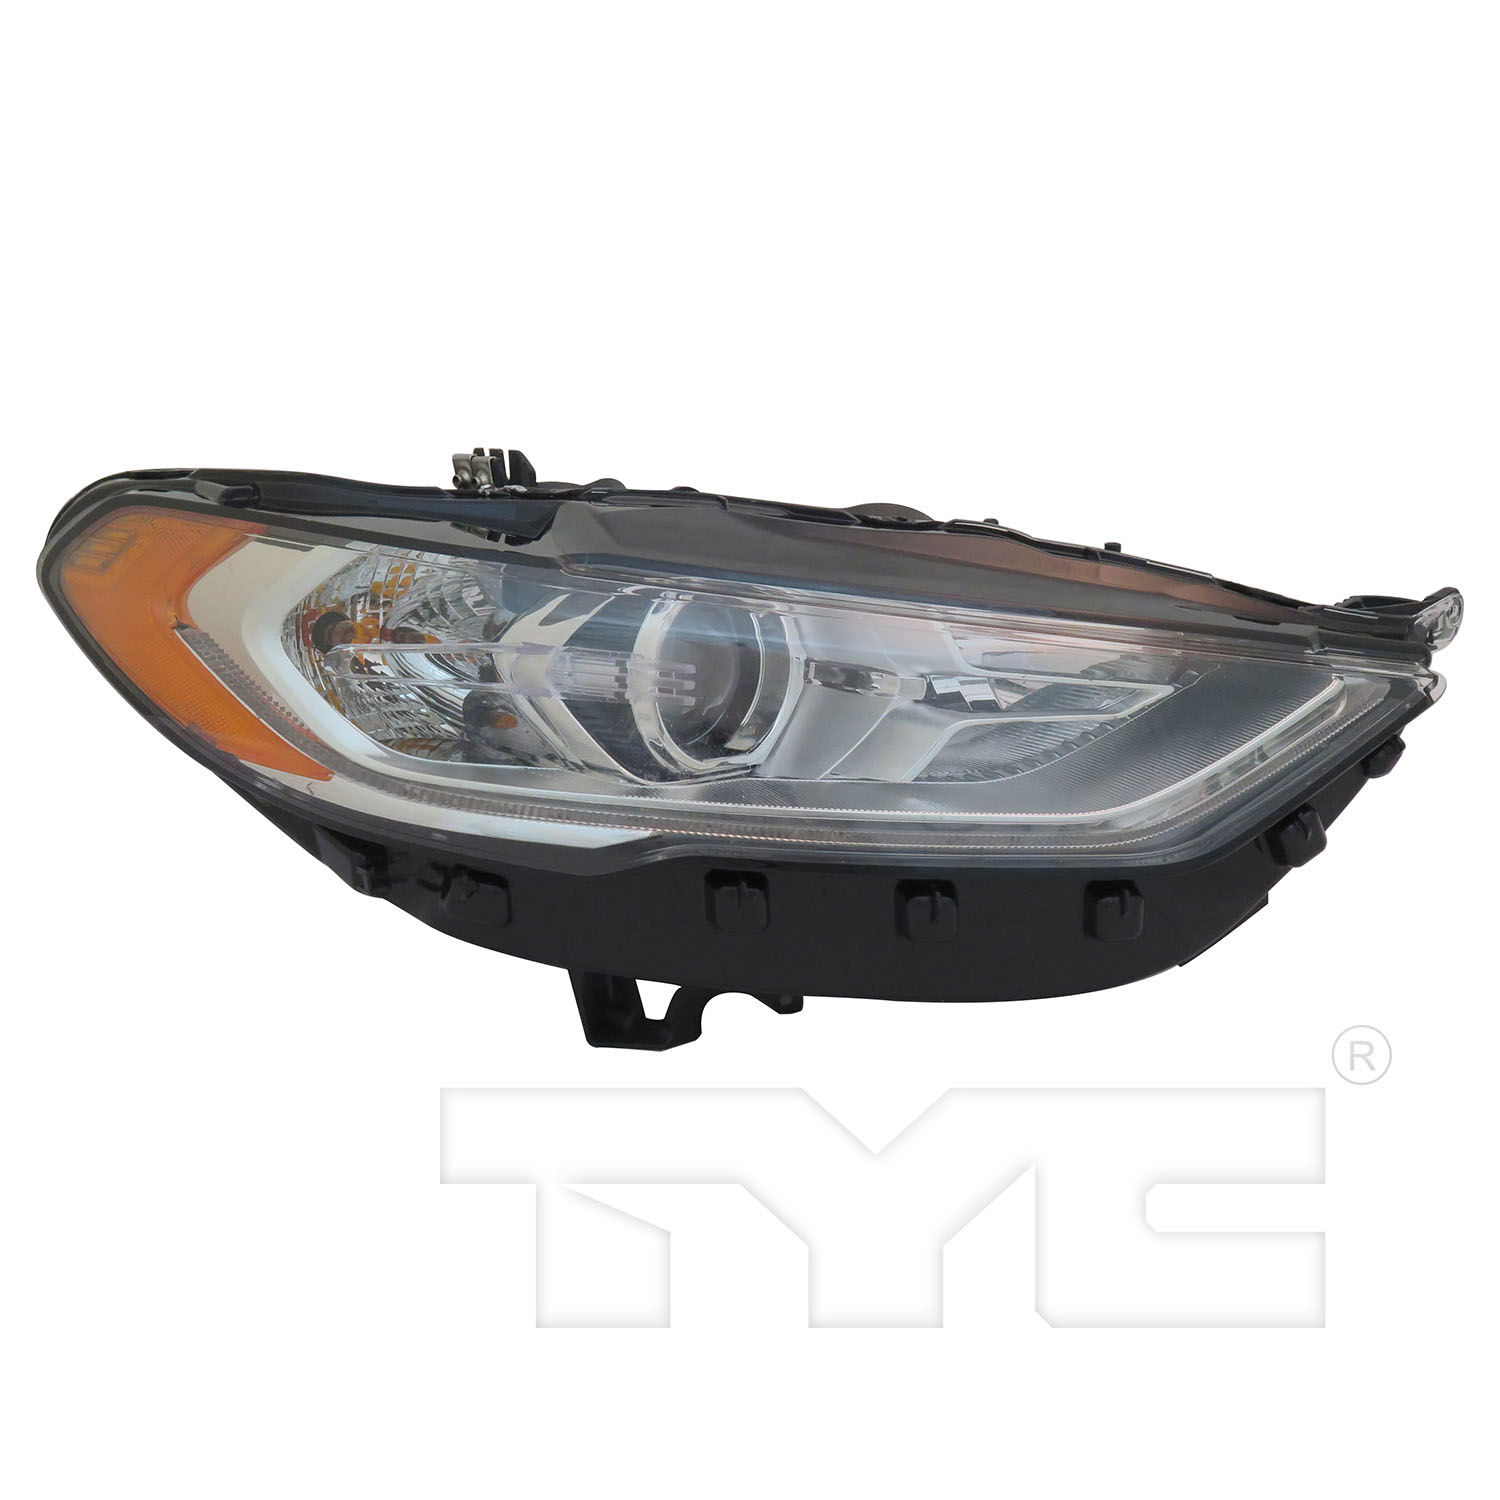 Aftermarket HEADLIGHTS for FORD - FUSION, FUSION,17-20,RT Headlamp assy composite